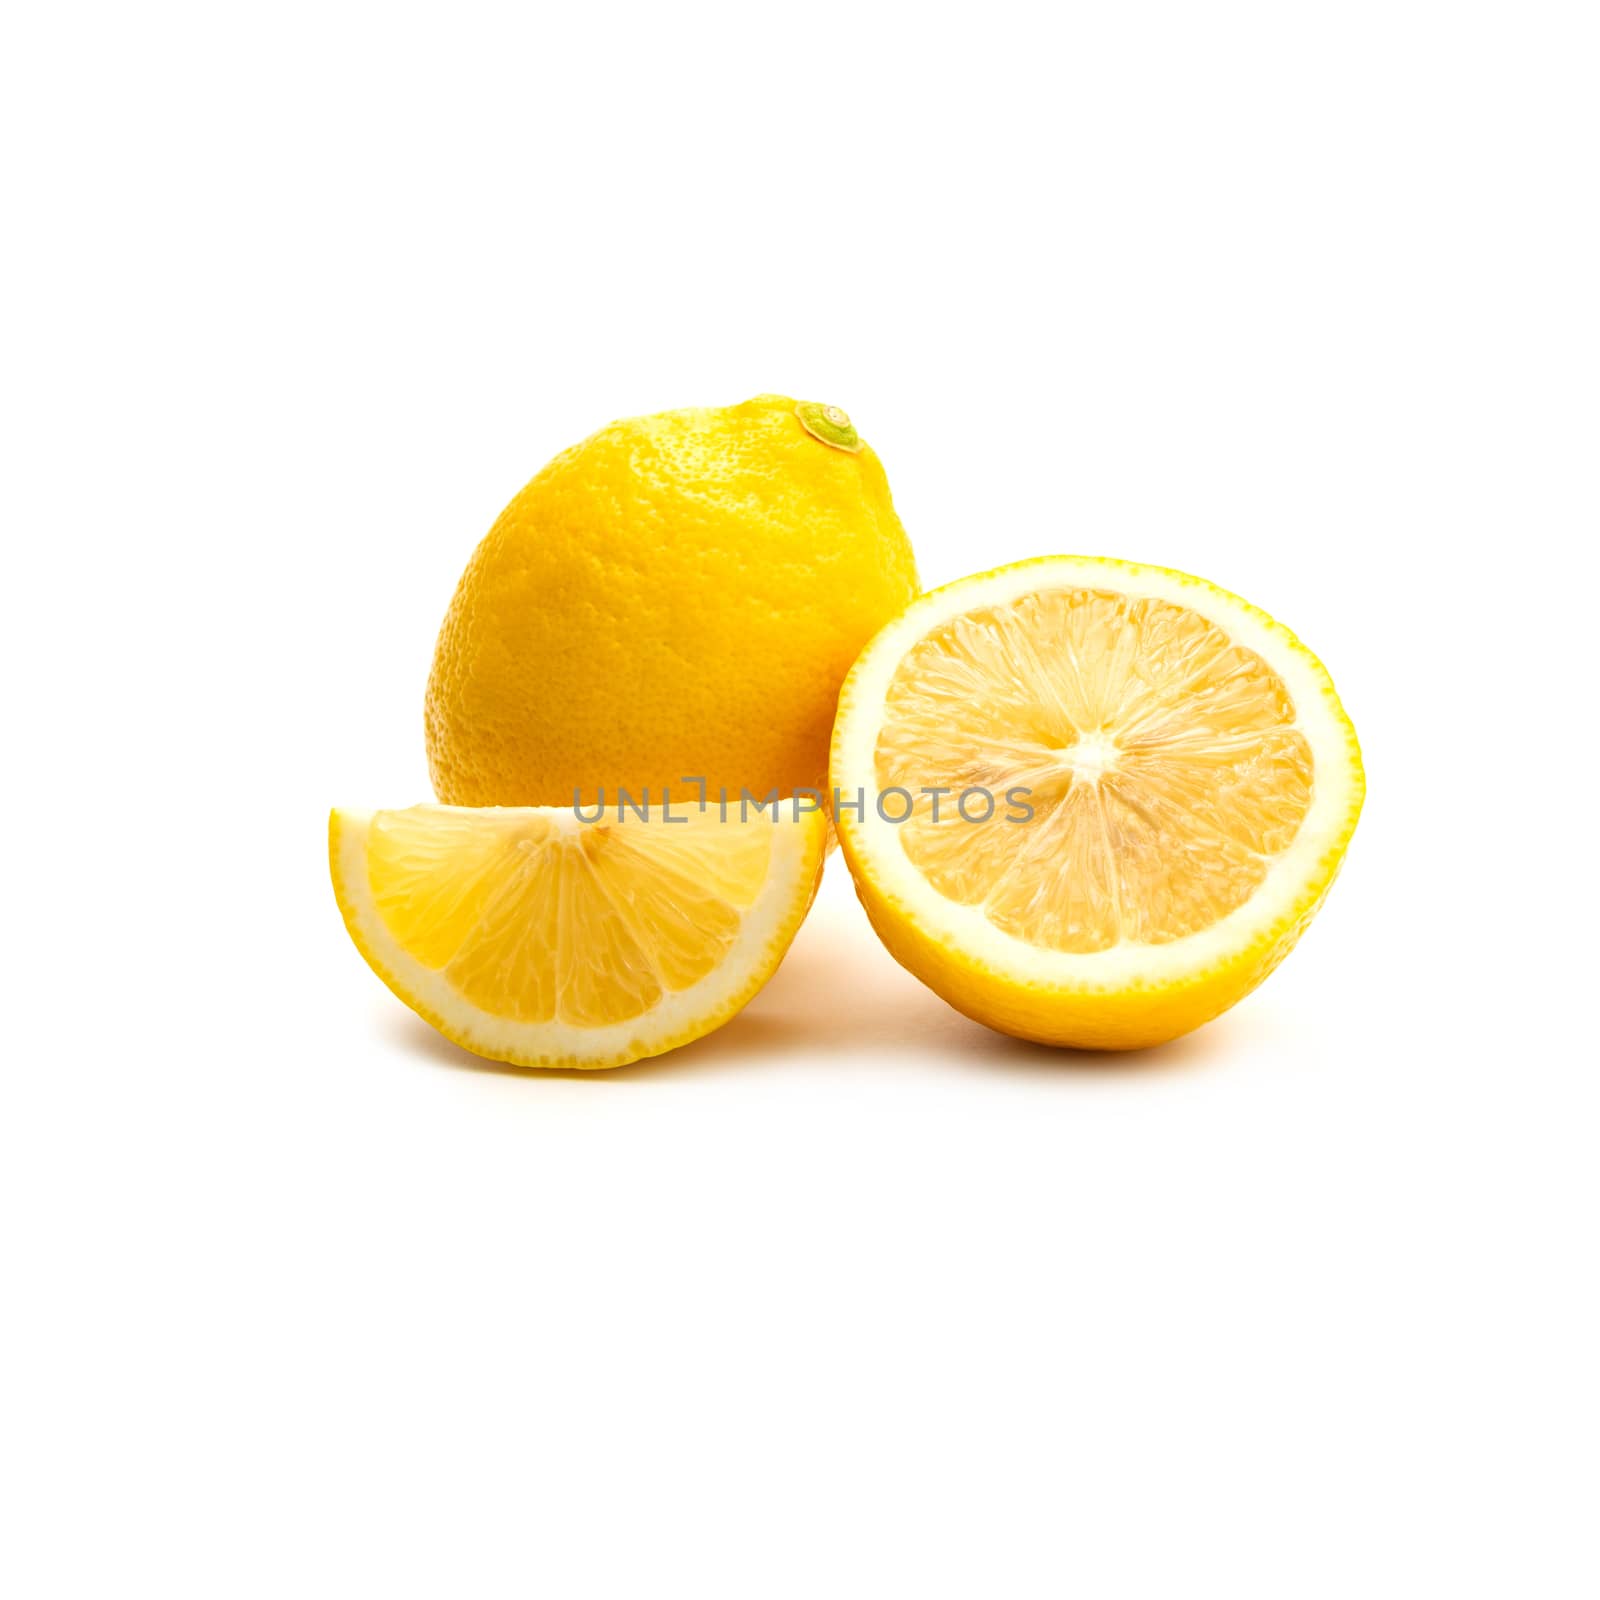 Fresh lemon isolated on white background. Food and healthy concept.